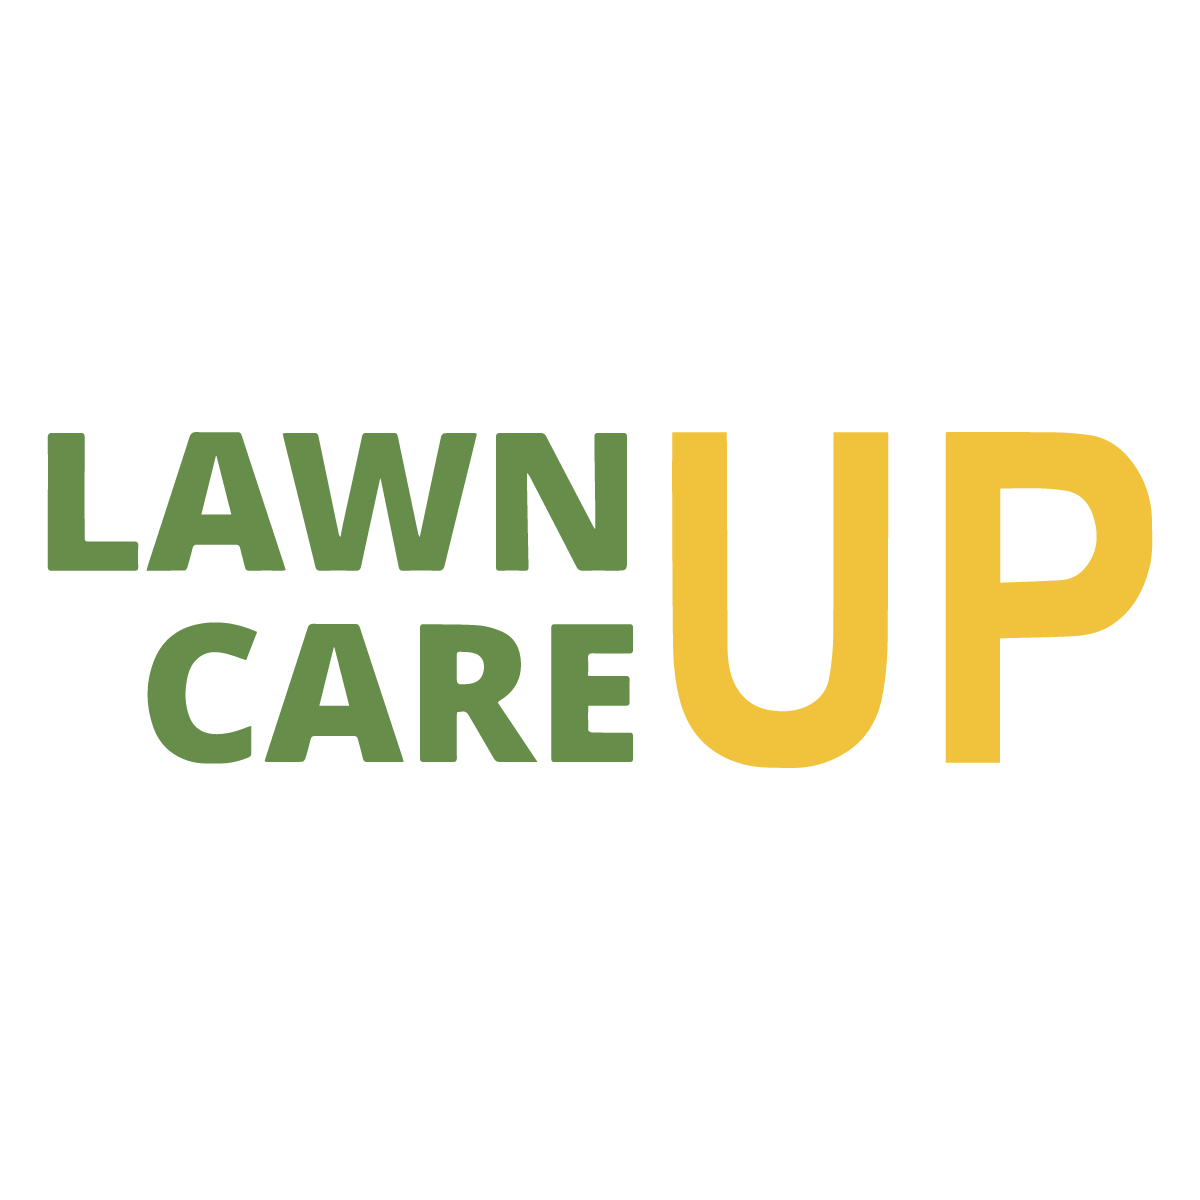 Lawn Care Up Offers 100% Electric Lawn Care Services in Sacramento, CA Area